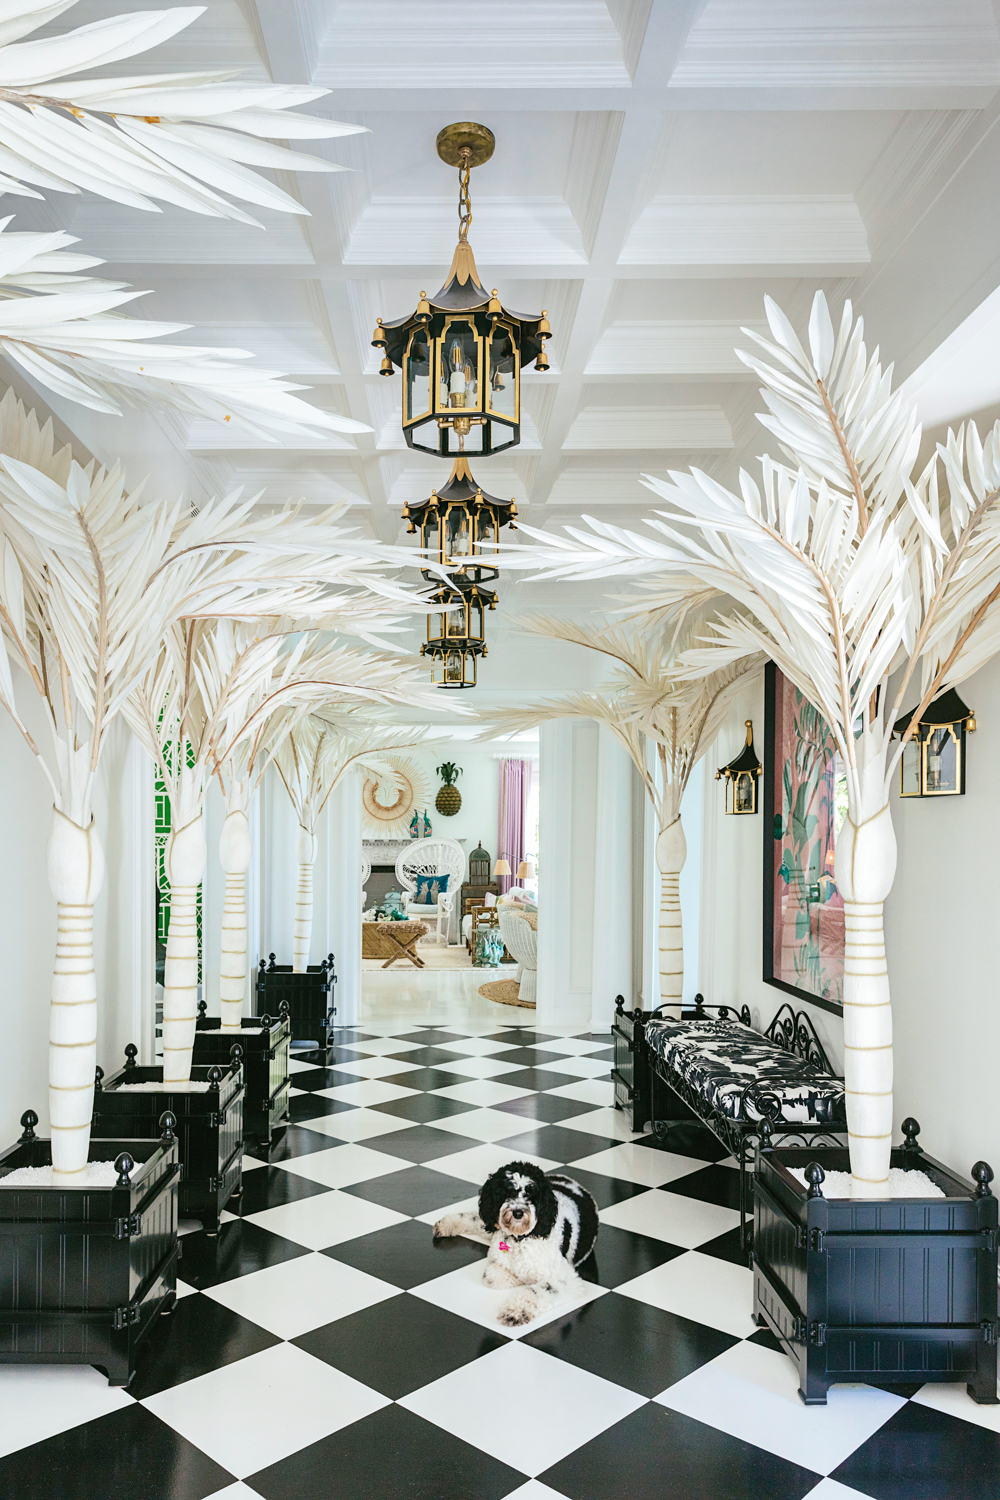 A dog lays on checkered hallway floor lined with white palms, and black-and-gold lights hang above